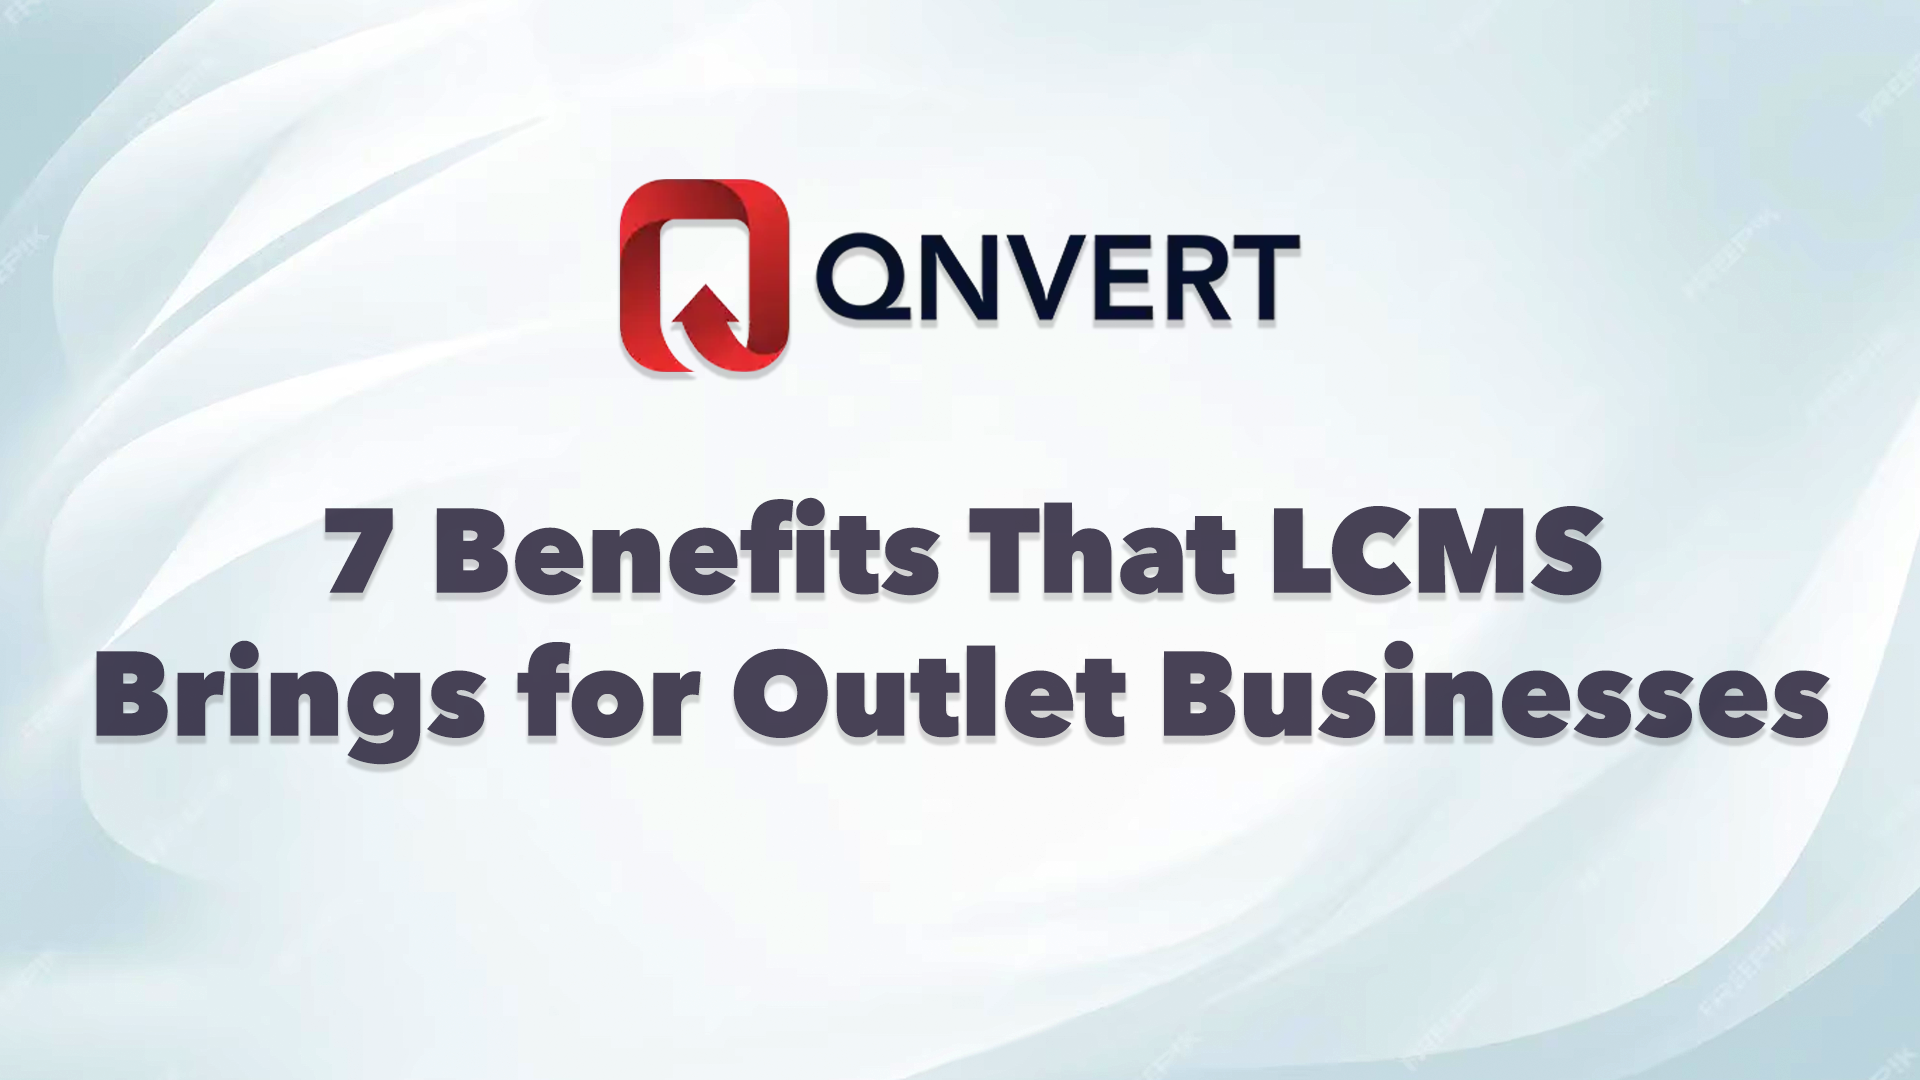 7 Benefits That LCMS Brings for Outlet Businesses